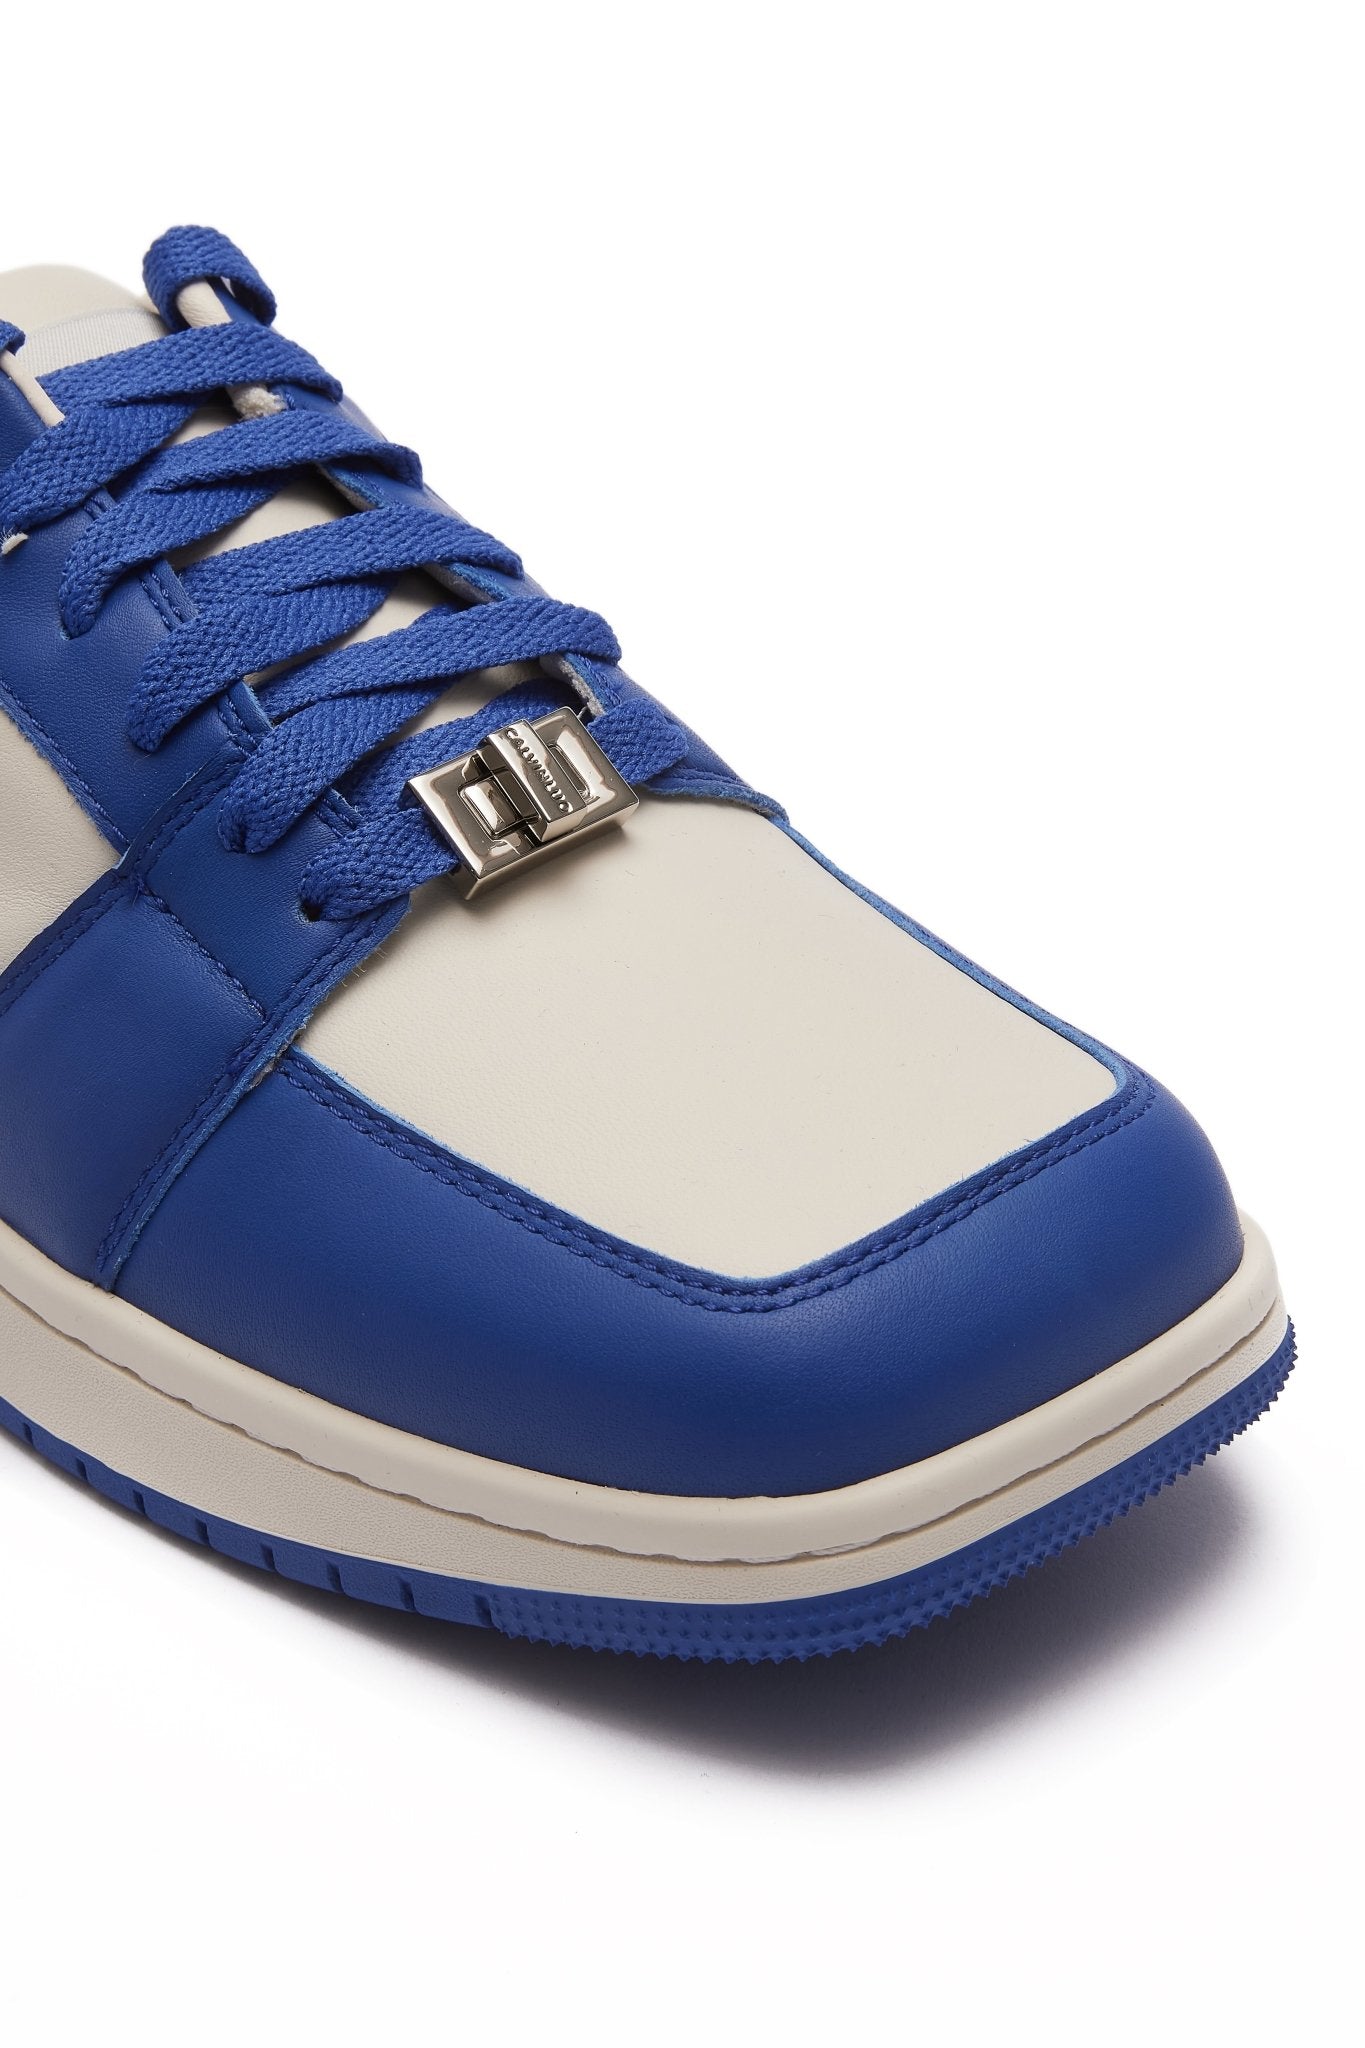 CALVIN LUO Blue Square Toe Low Sneakers | MADA IN CHINA